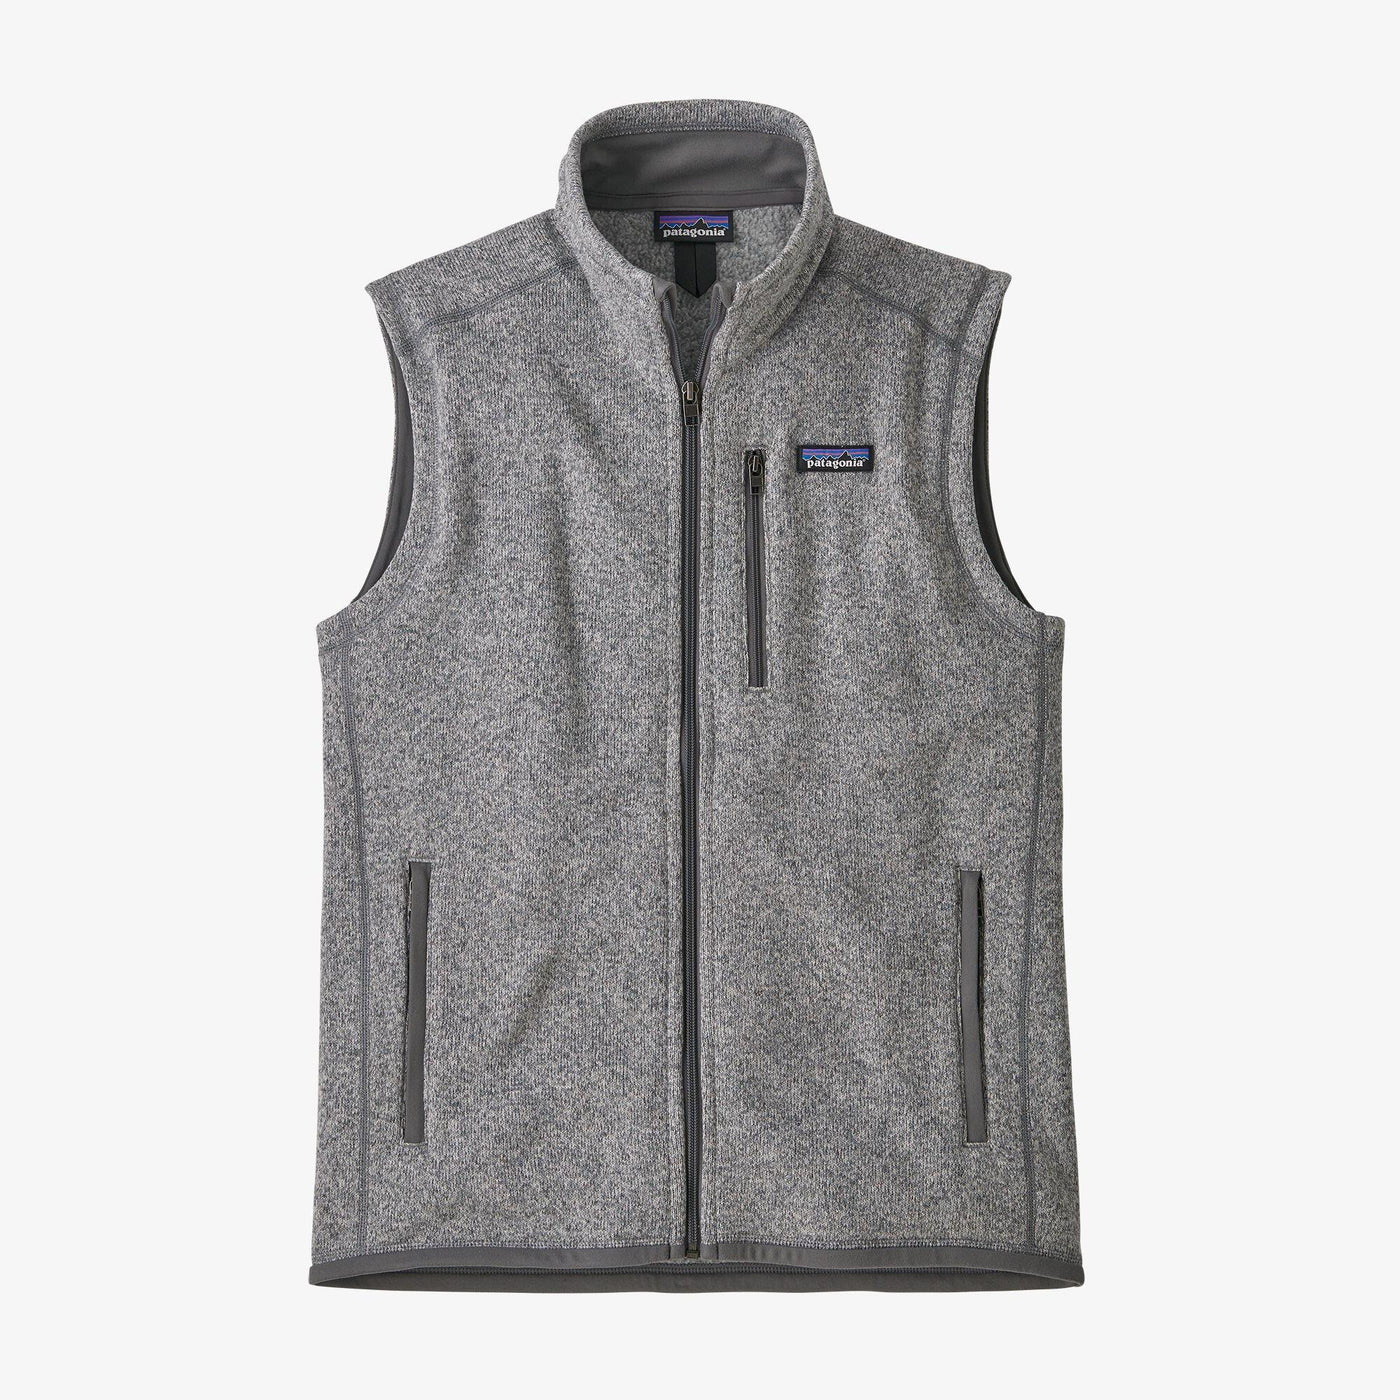 Patagonia Men's Better Sweater Vest-MENS CLOTHING-Stonewash-M-Kevin's Fine Outdoor Gear & Apparel